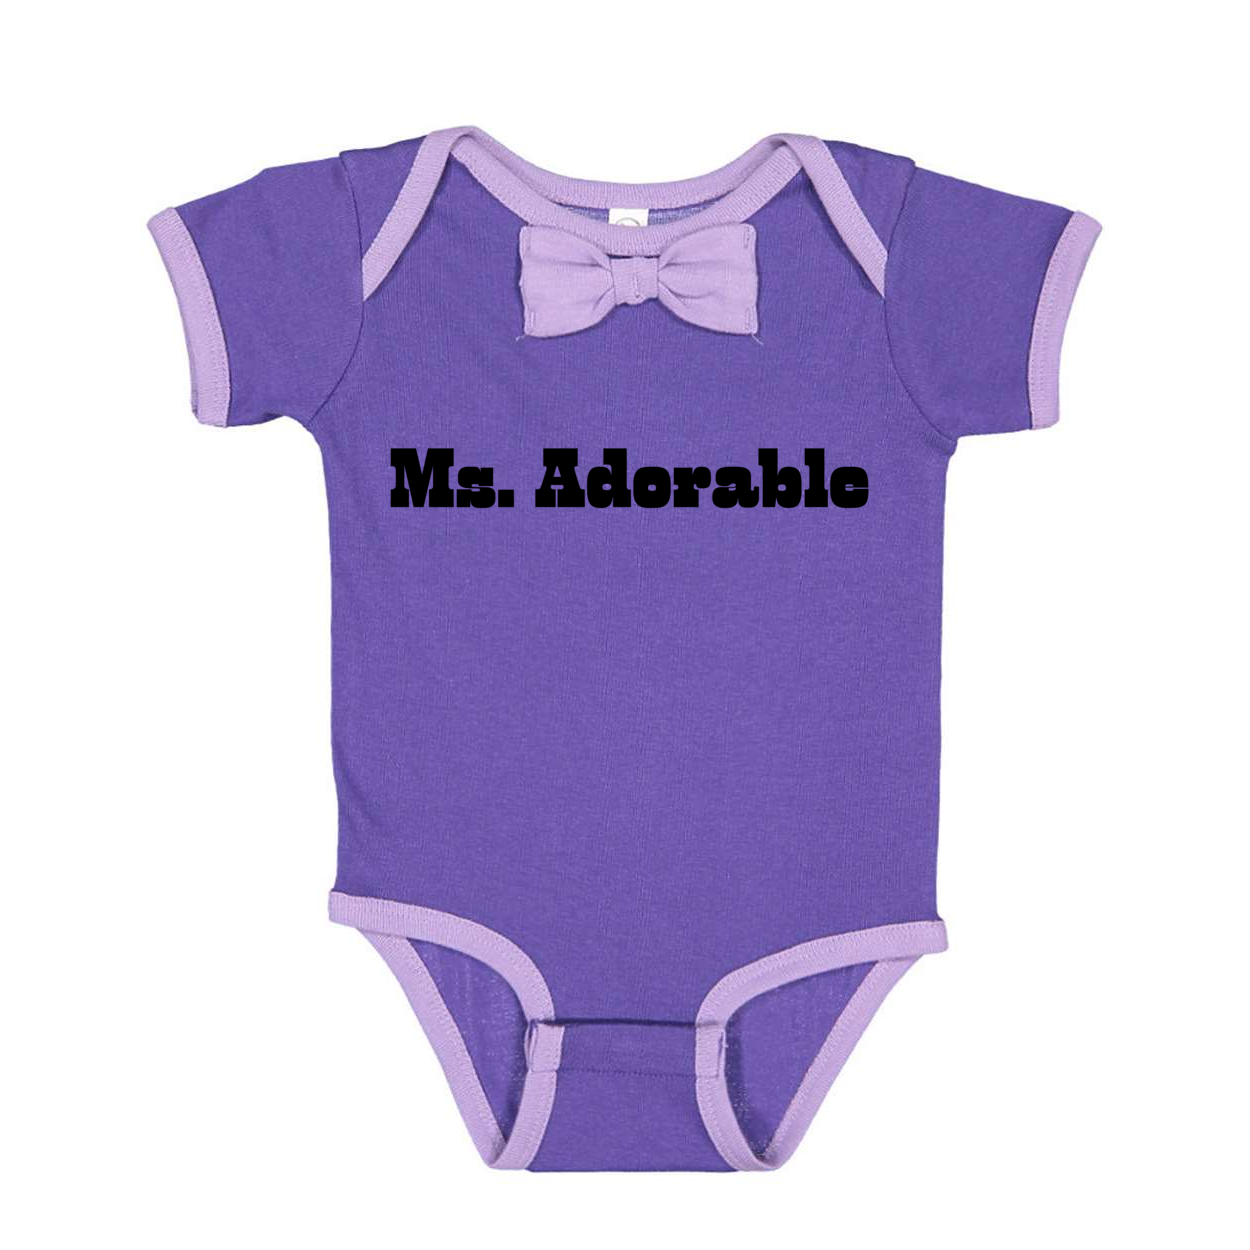 PURPLE/ LAVENDER - Ms. Adorable Baby Rib Bow Tie Bodysuit - Ships from The US - infant onesie at TFC&H Co.